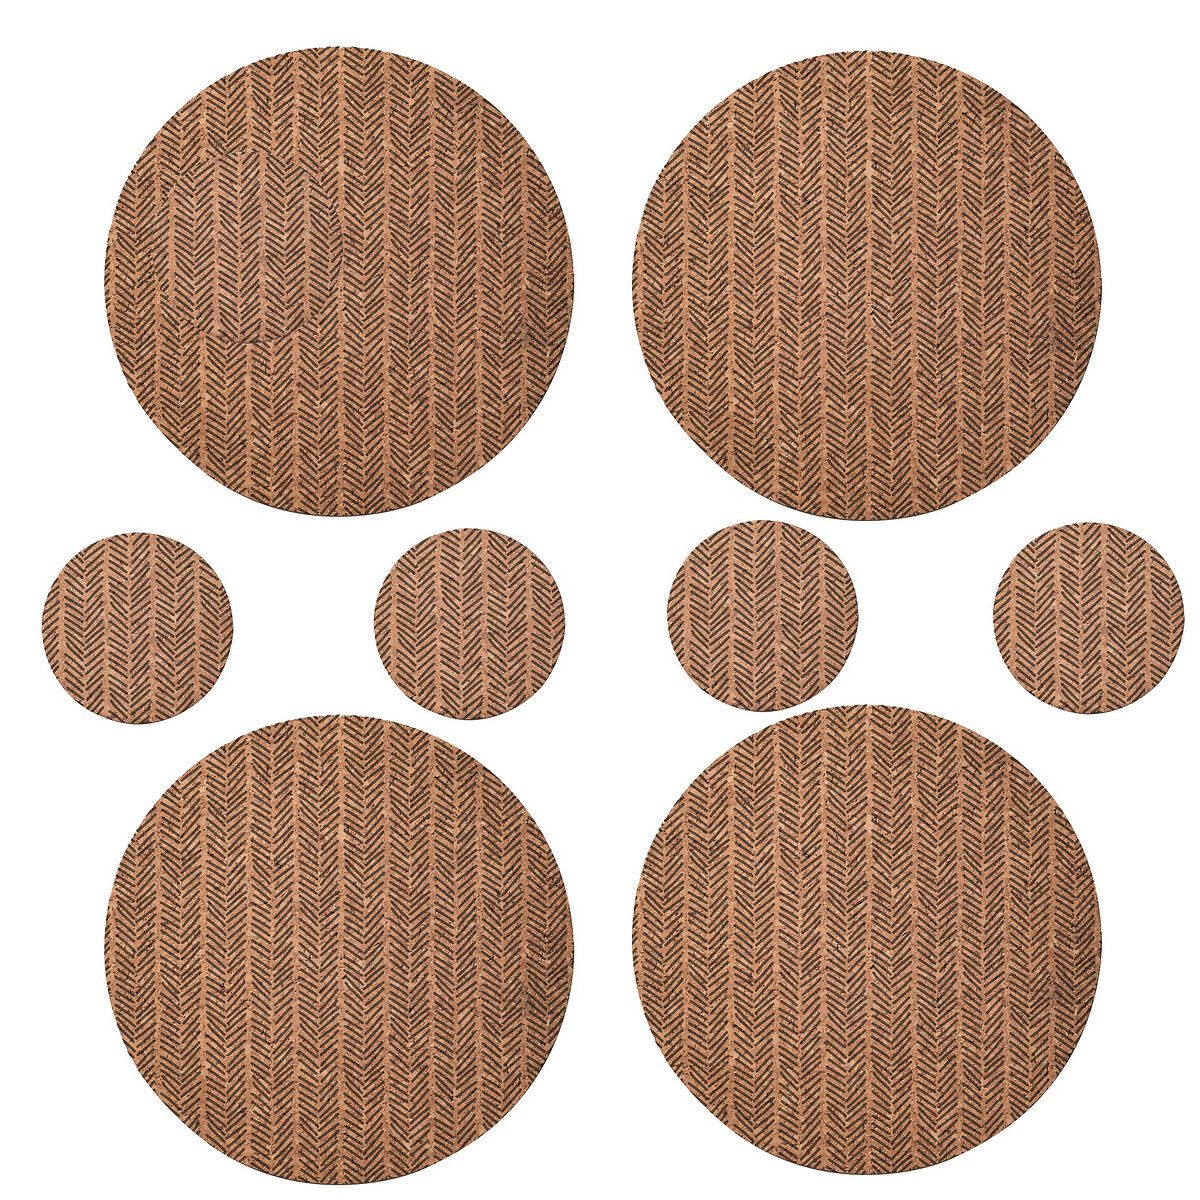 Coaster and Placemat Set | La Redoute (UK)